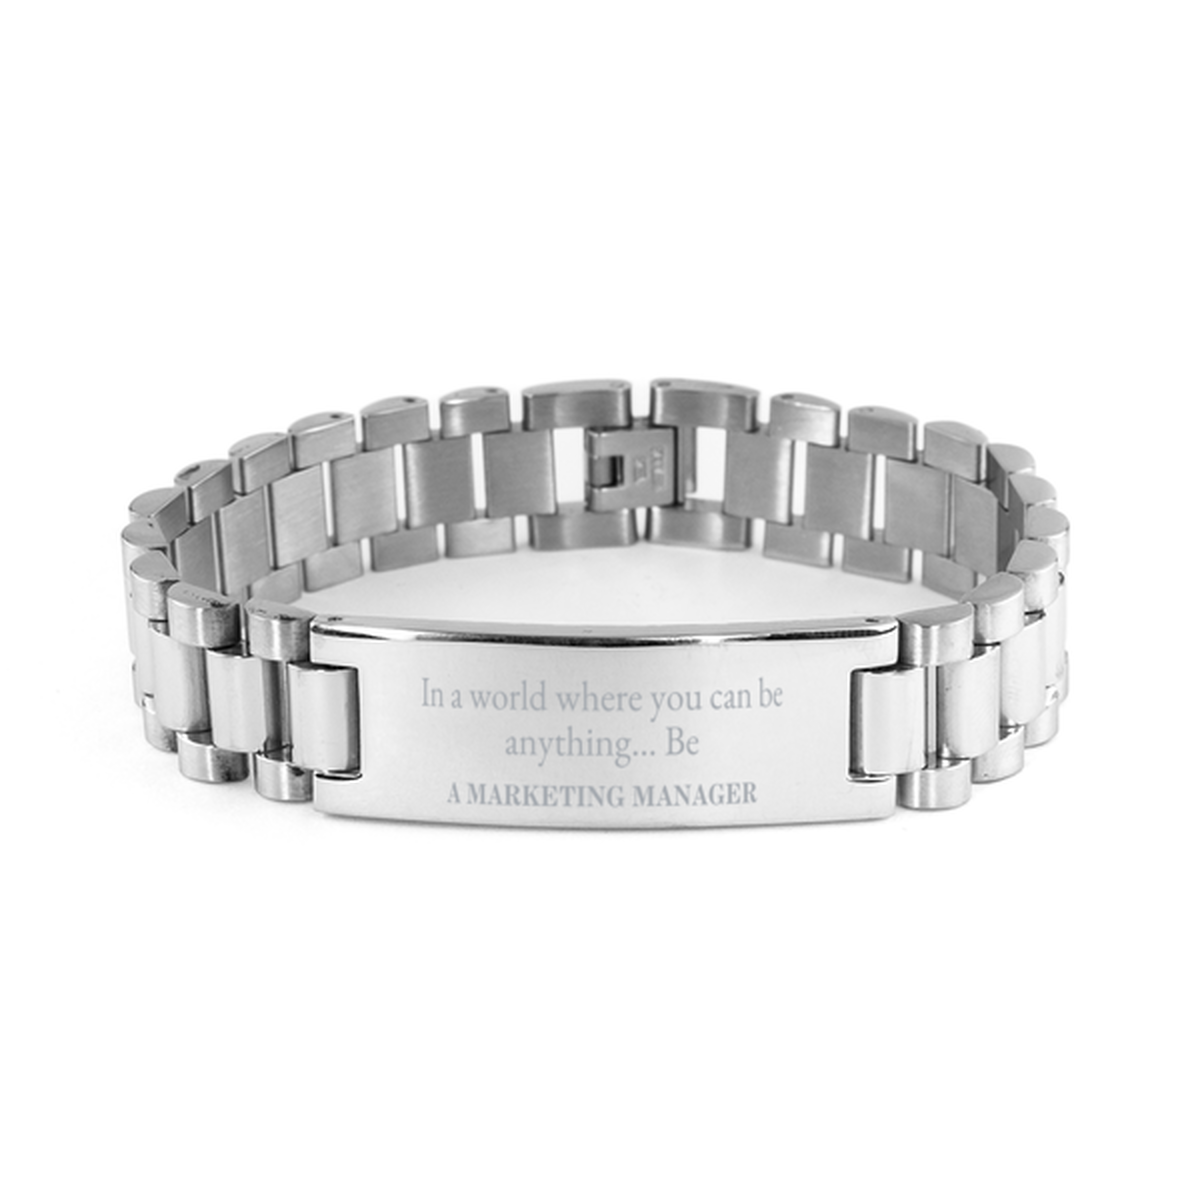 Gifts for Marketing Manager, In a world where you can be anything, Appreciation Birthday Ladder Stainless Steel Bracelet for Men, Women, Friends, Coworkers